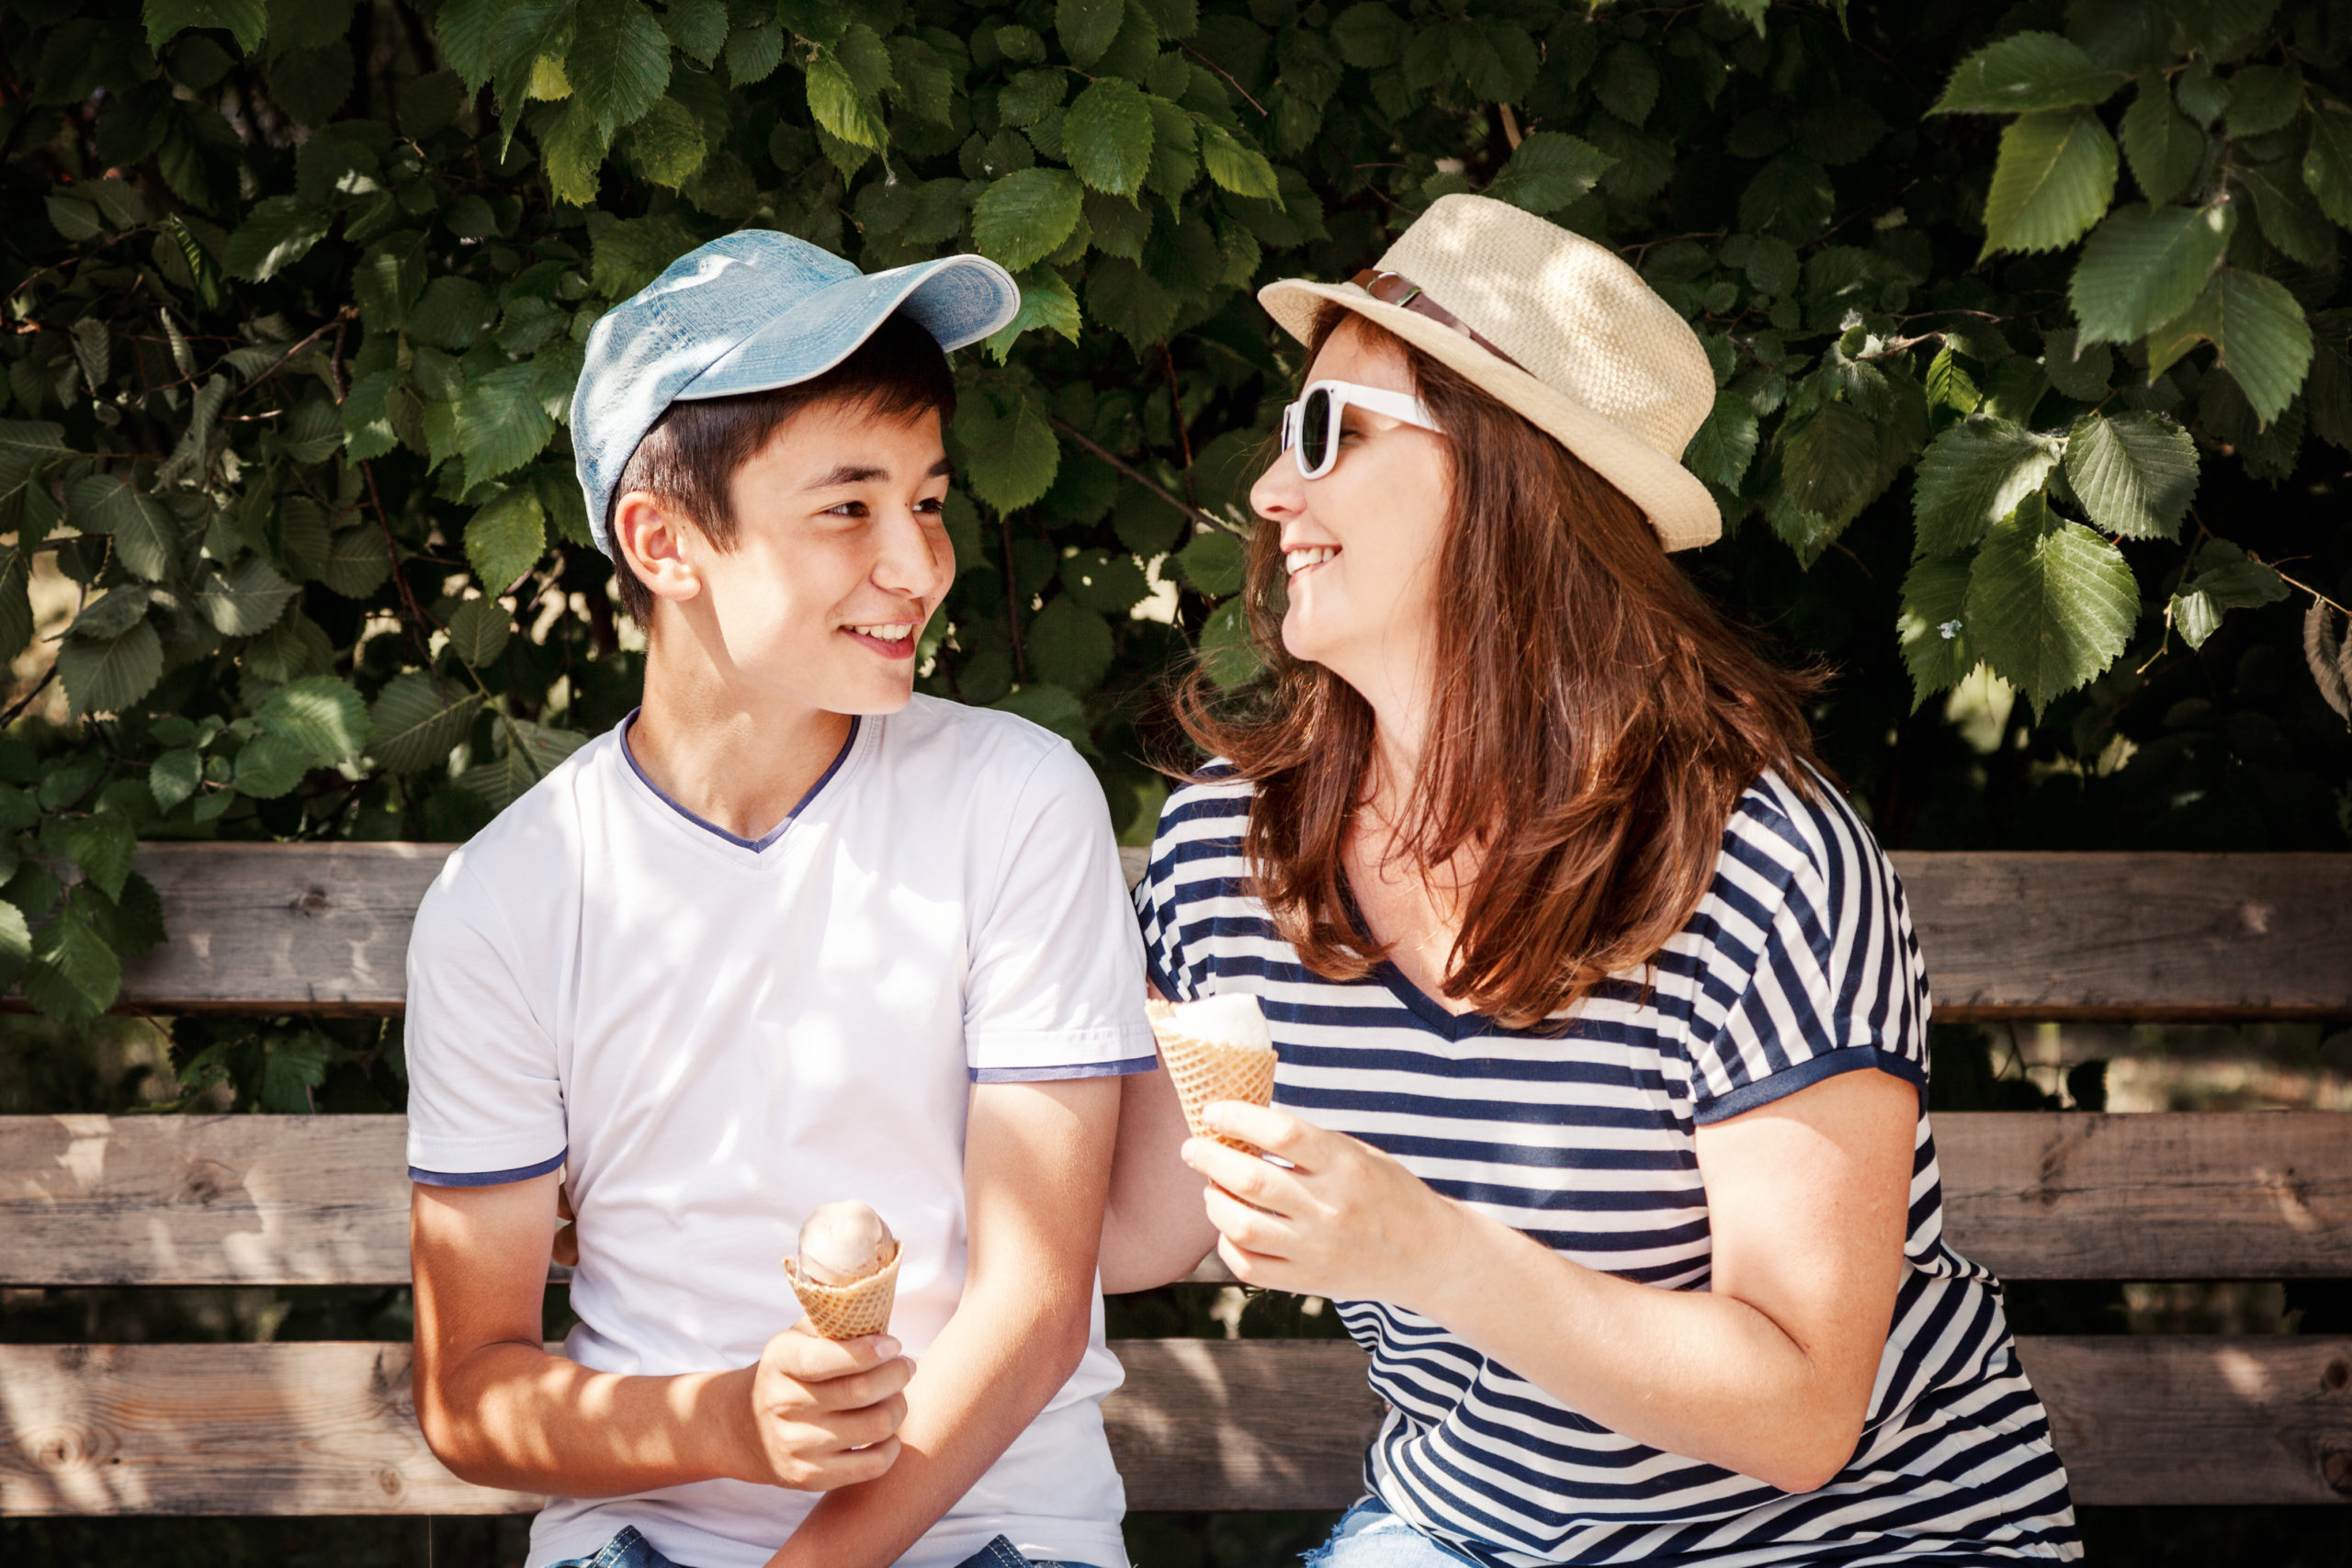 Woman and boy eating ice cream on a bench